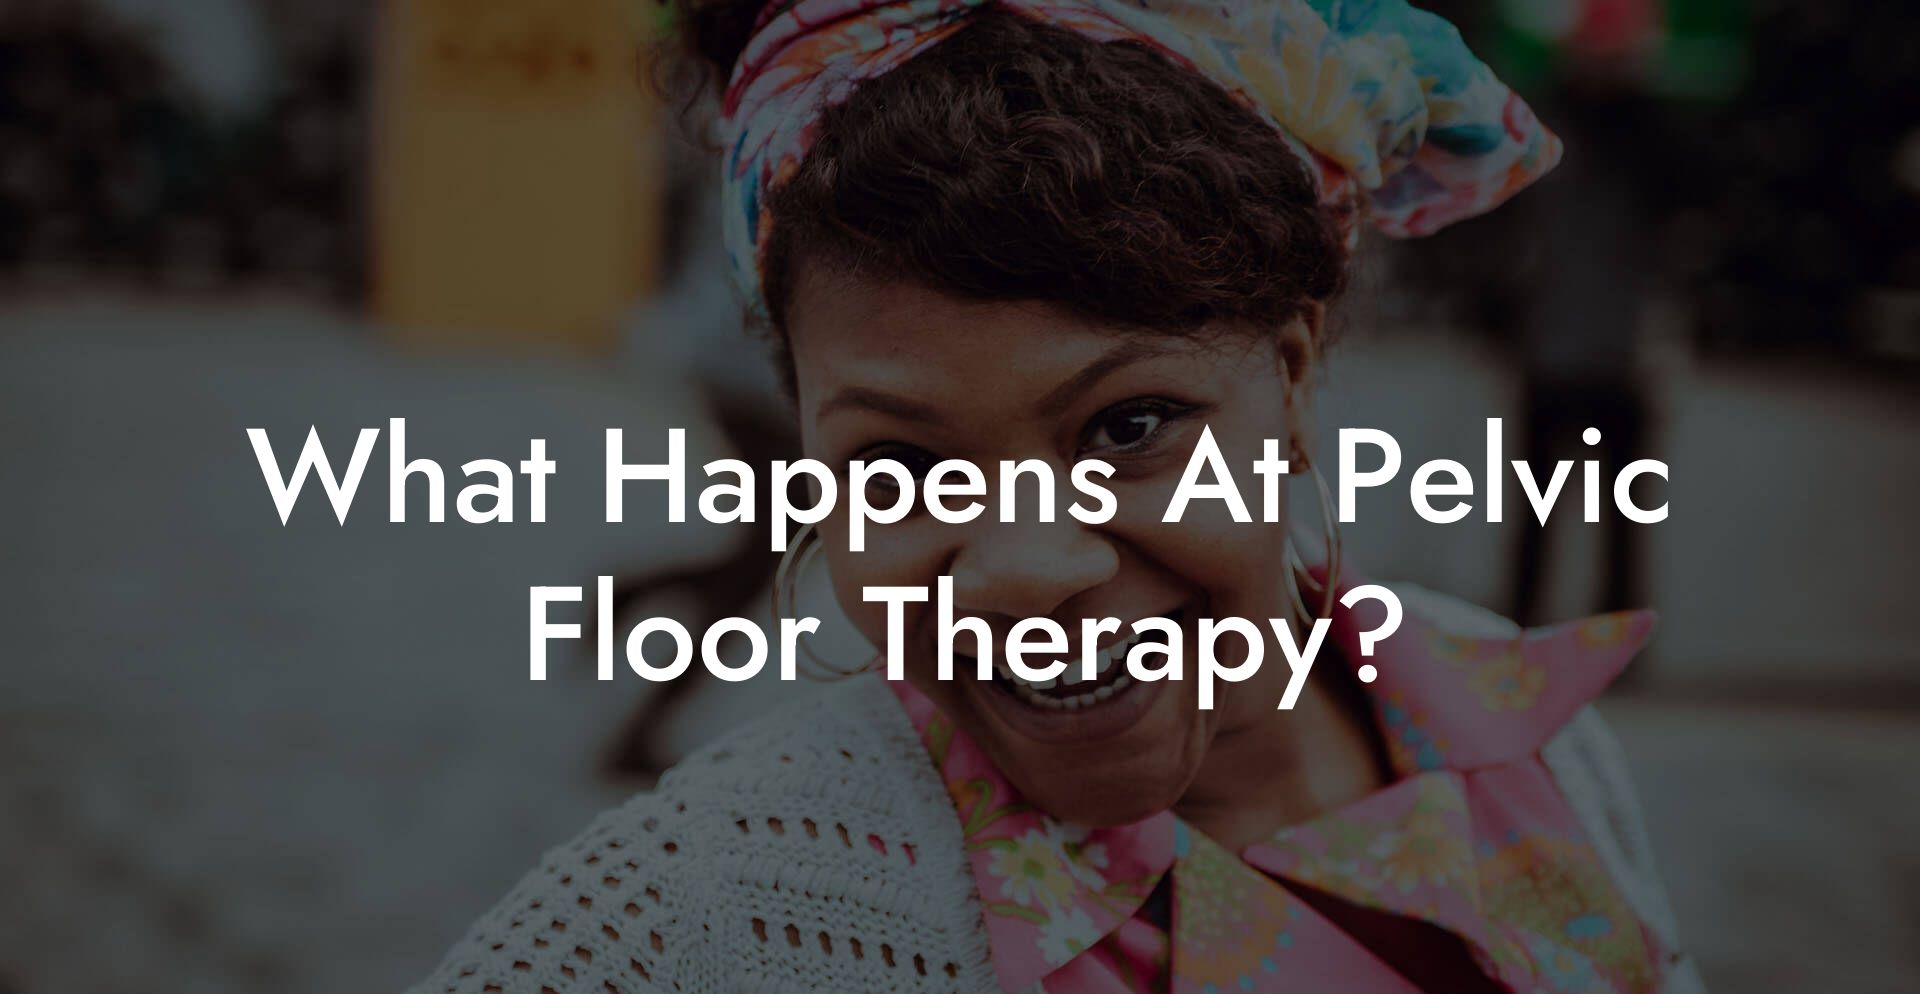 What Happens At Pelvic Floor Therapy?